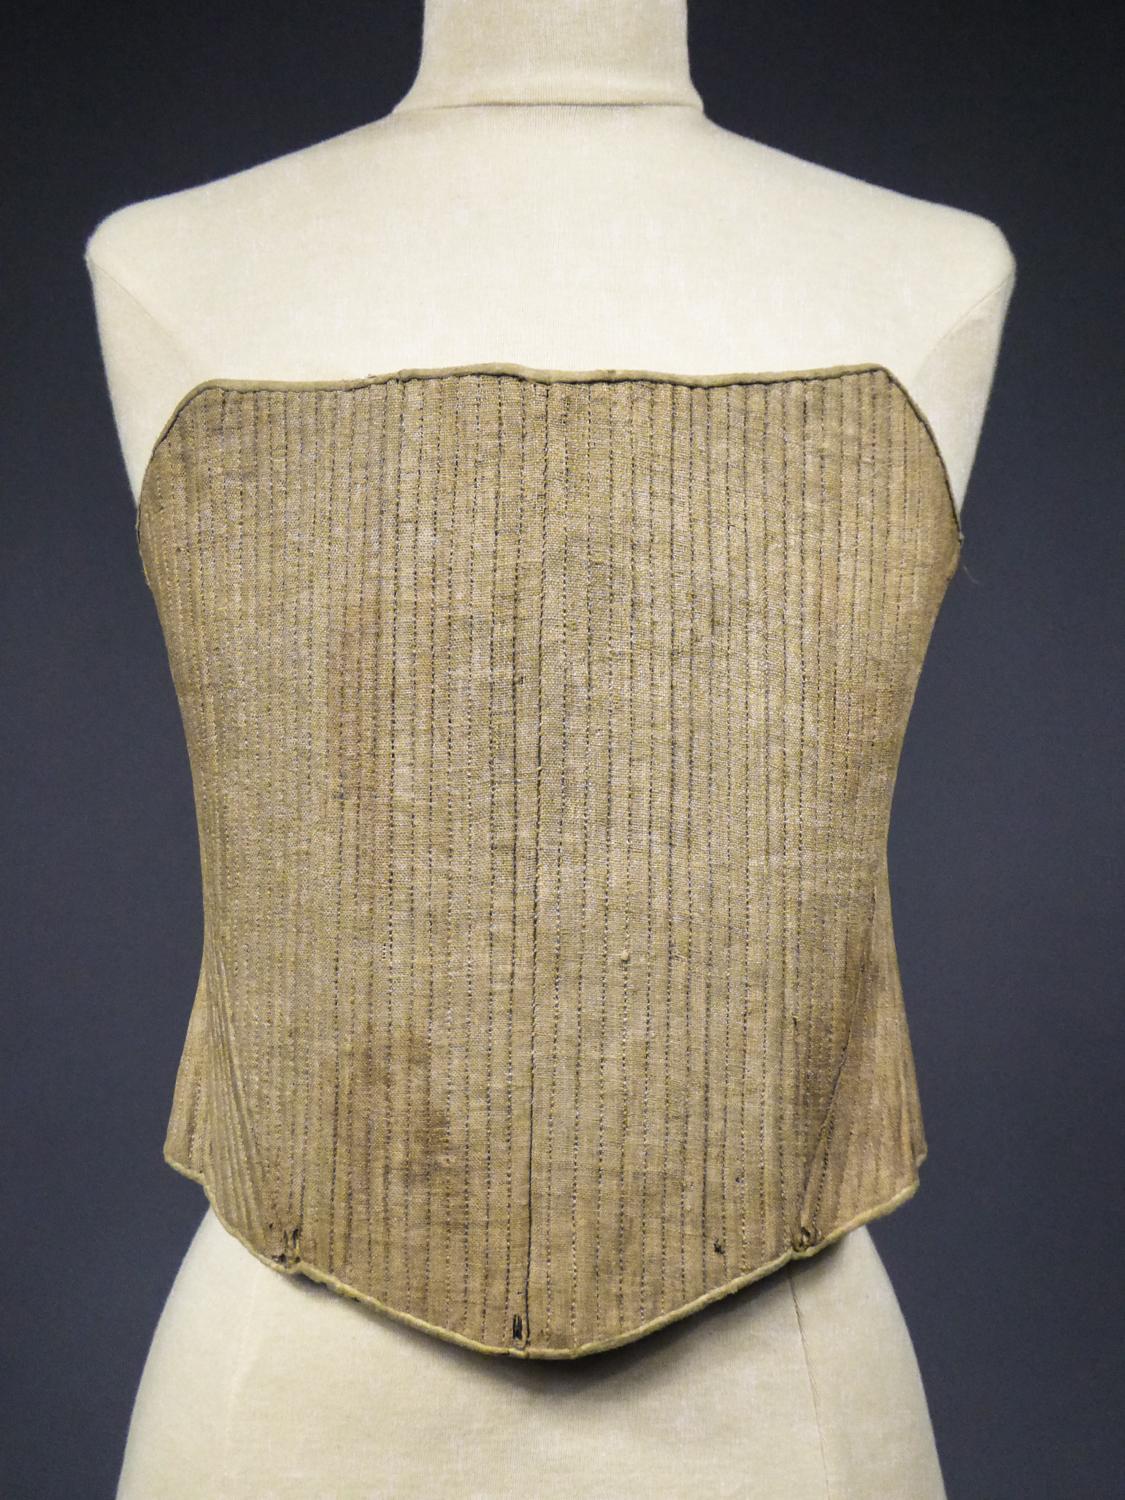 Circa 1730
France

Rare rigid Whale Boned Bodice in linen and hemp dating from the Louis XV period. Precious work of whalebone embroidery, stitched with a back stitch between a 